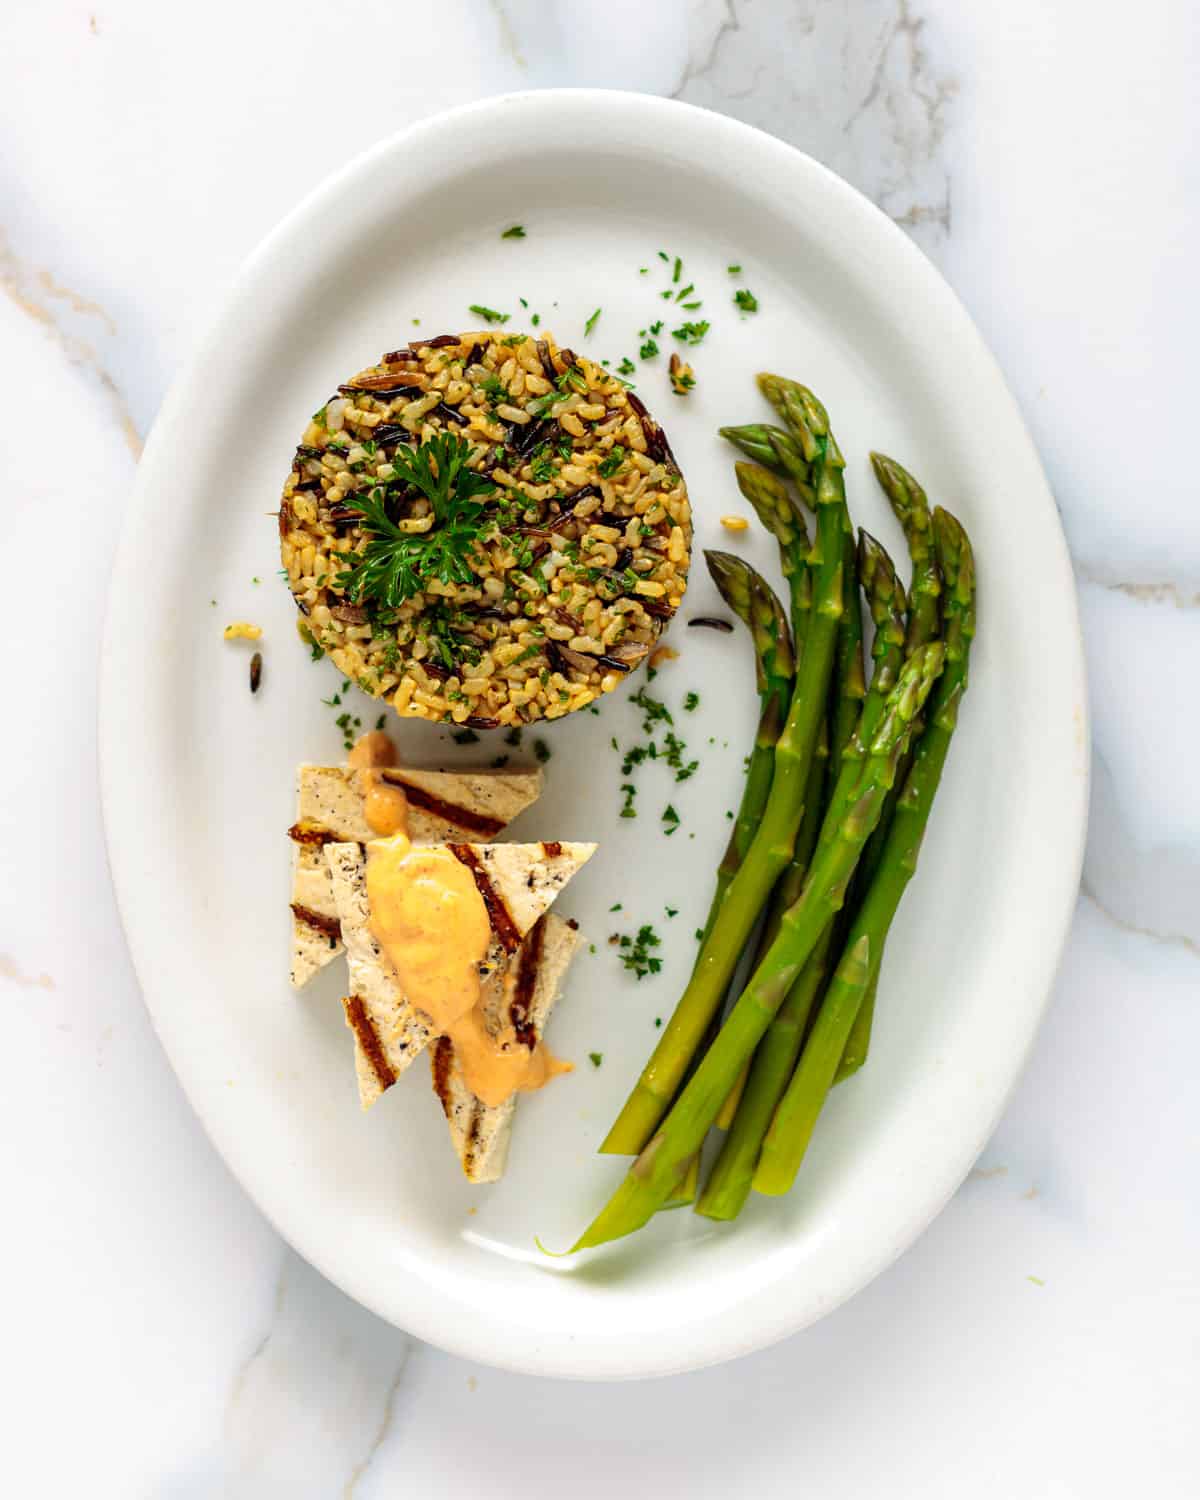 Oval plate wilth wild rice pilaf, asparagus and tofu.